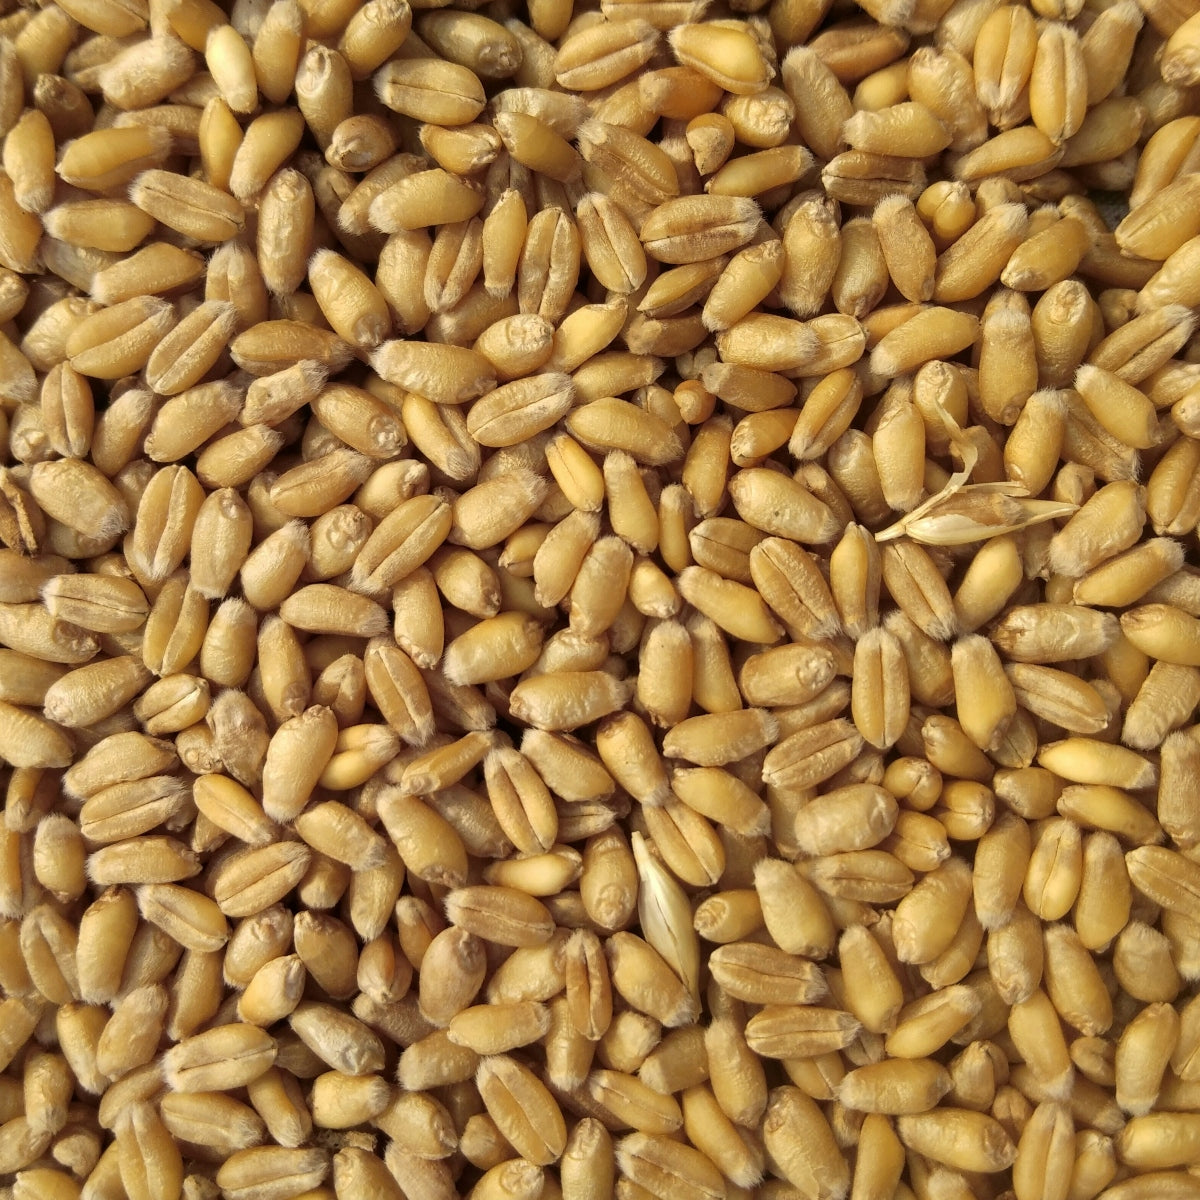 A bunch of wheat kernels containing gluten.